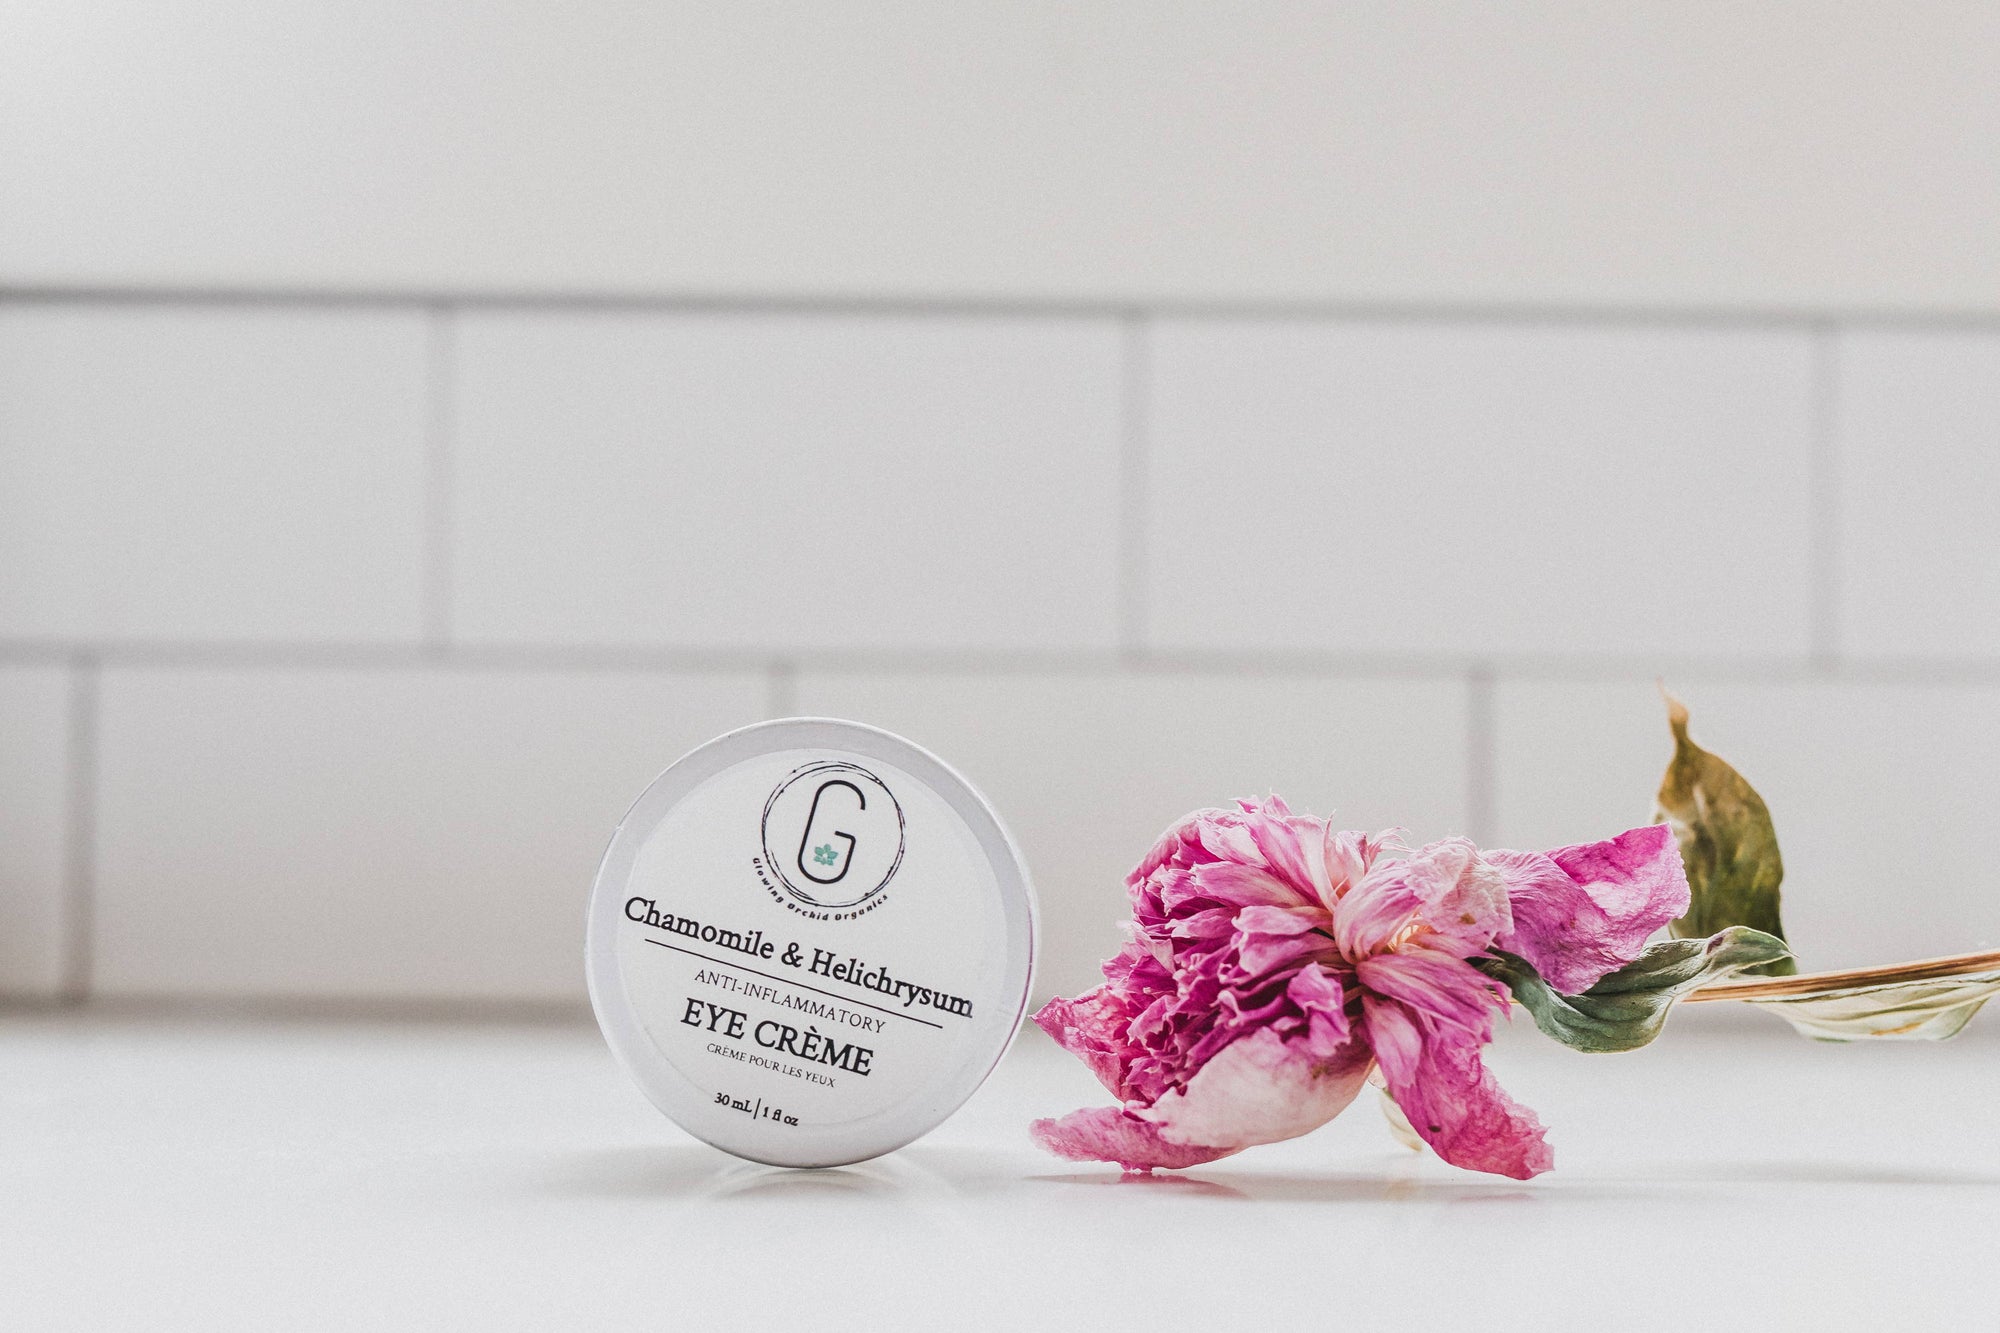 Deep Dive: All About Our Chamomile Eye Cream, from What’s In It to the Best Way to Apply It